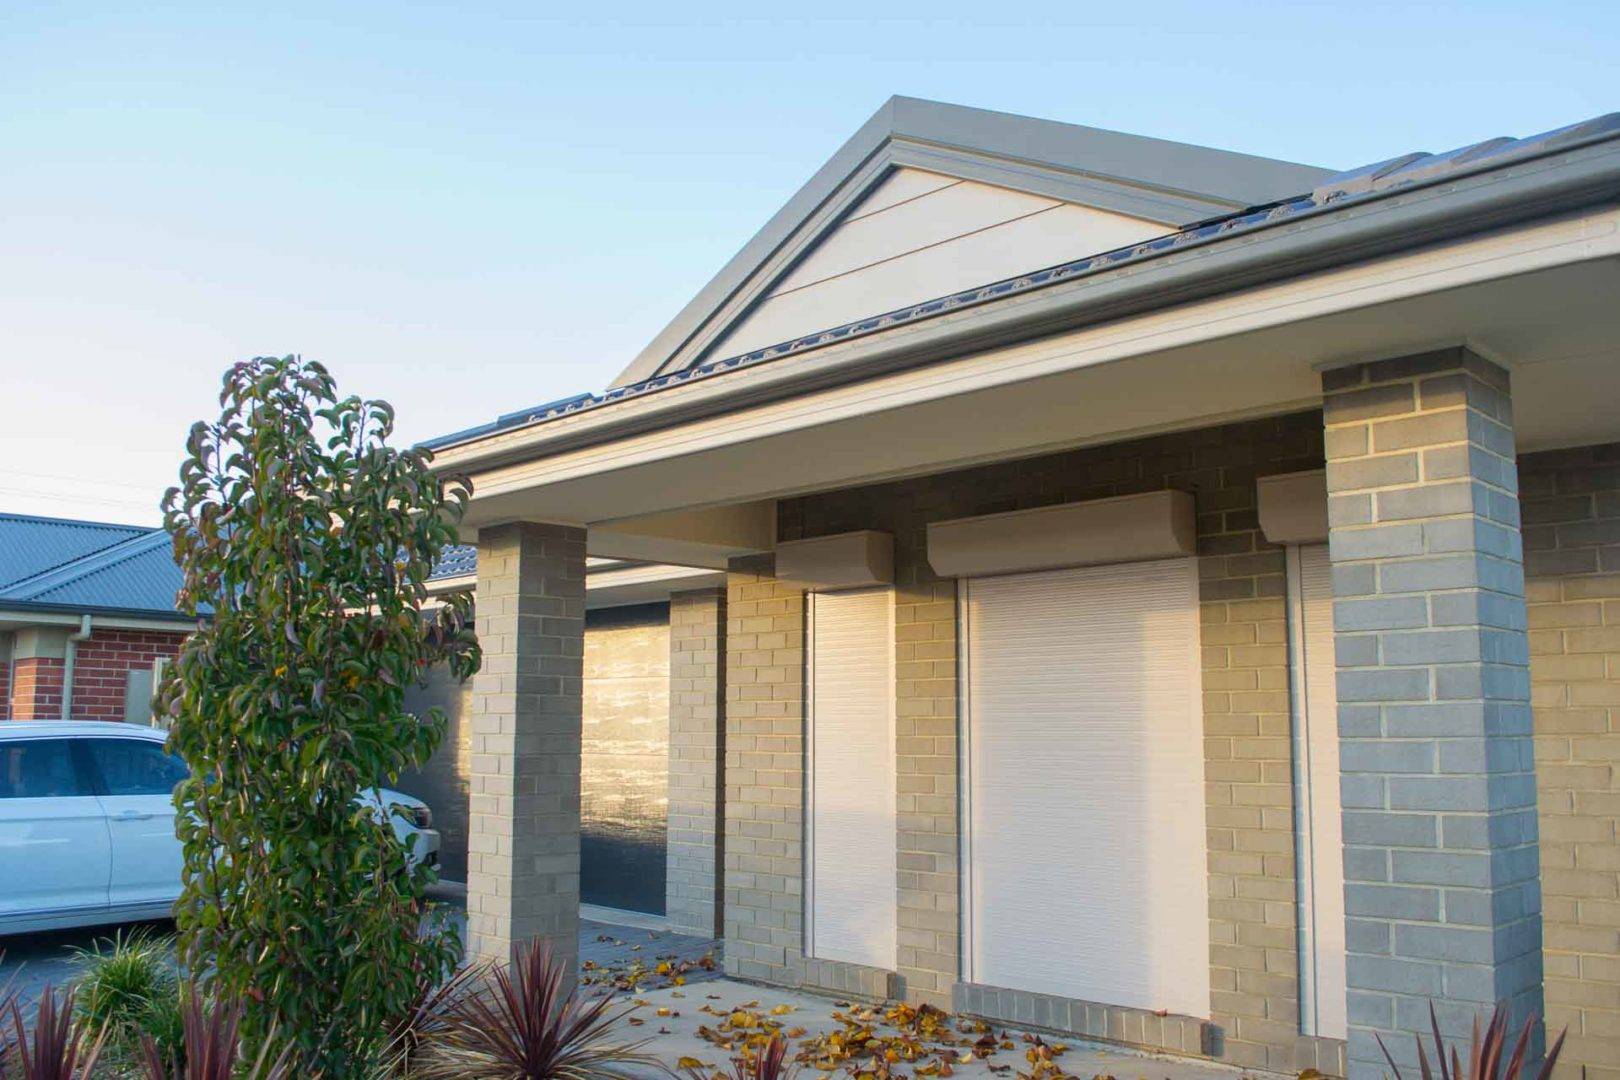 How to properly maintain your roller shutters - Follow these simple tips to keep your roller shutters in perfect working order, Australian Outdoor Living.